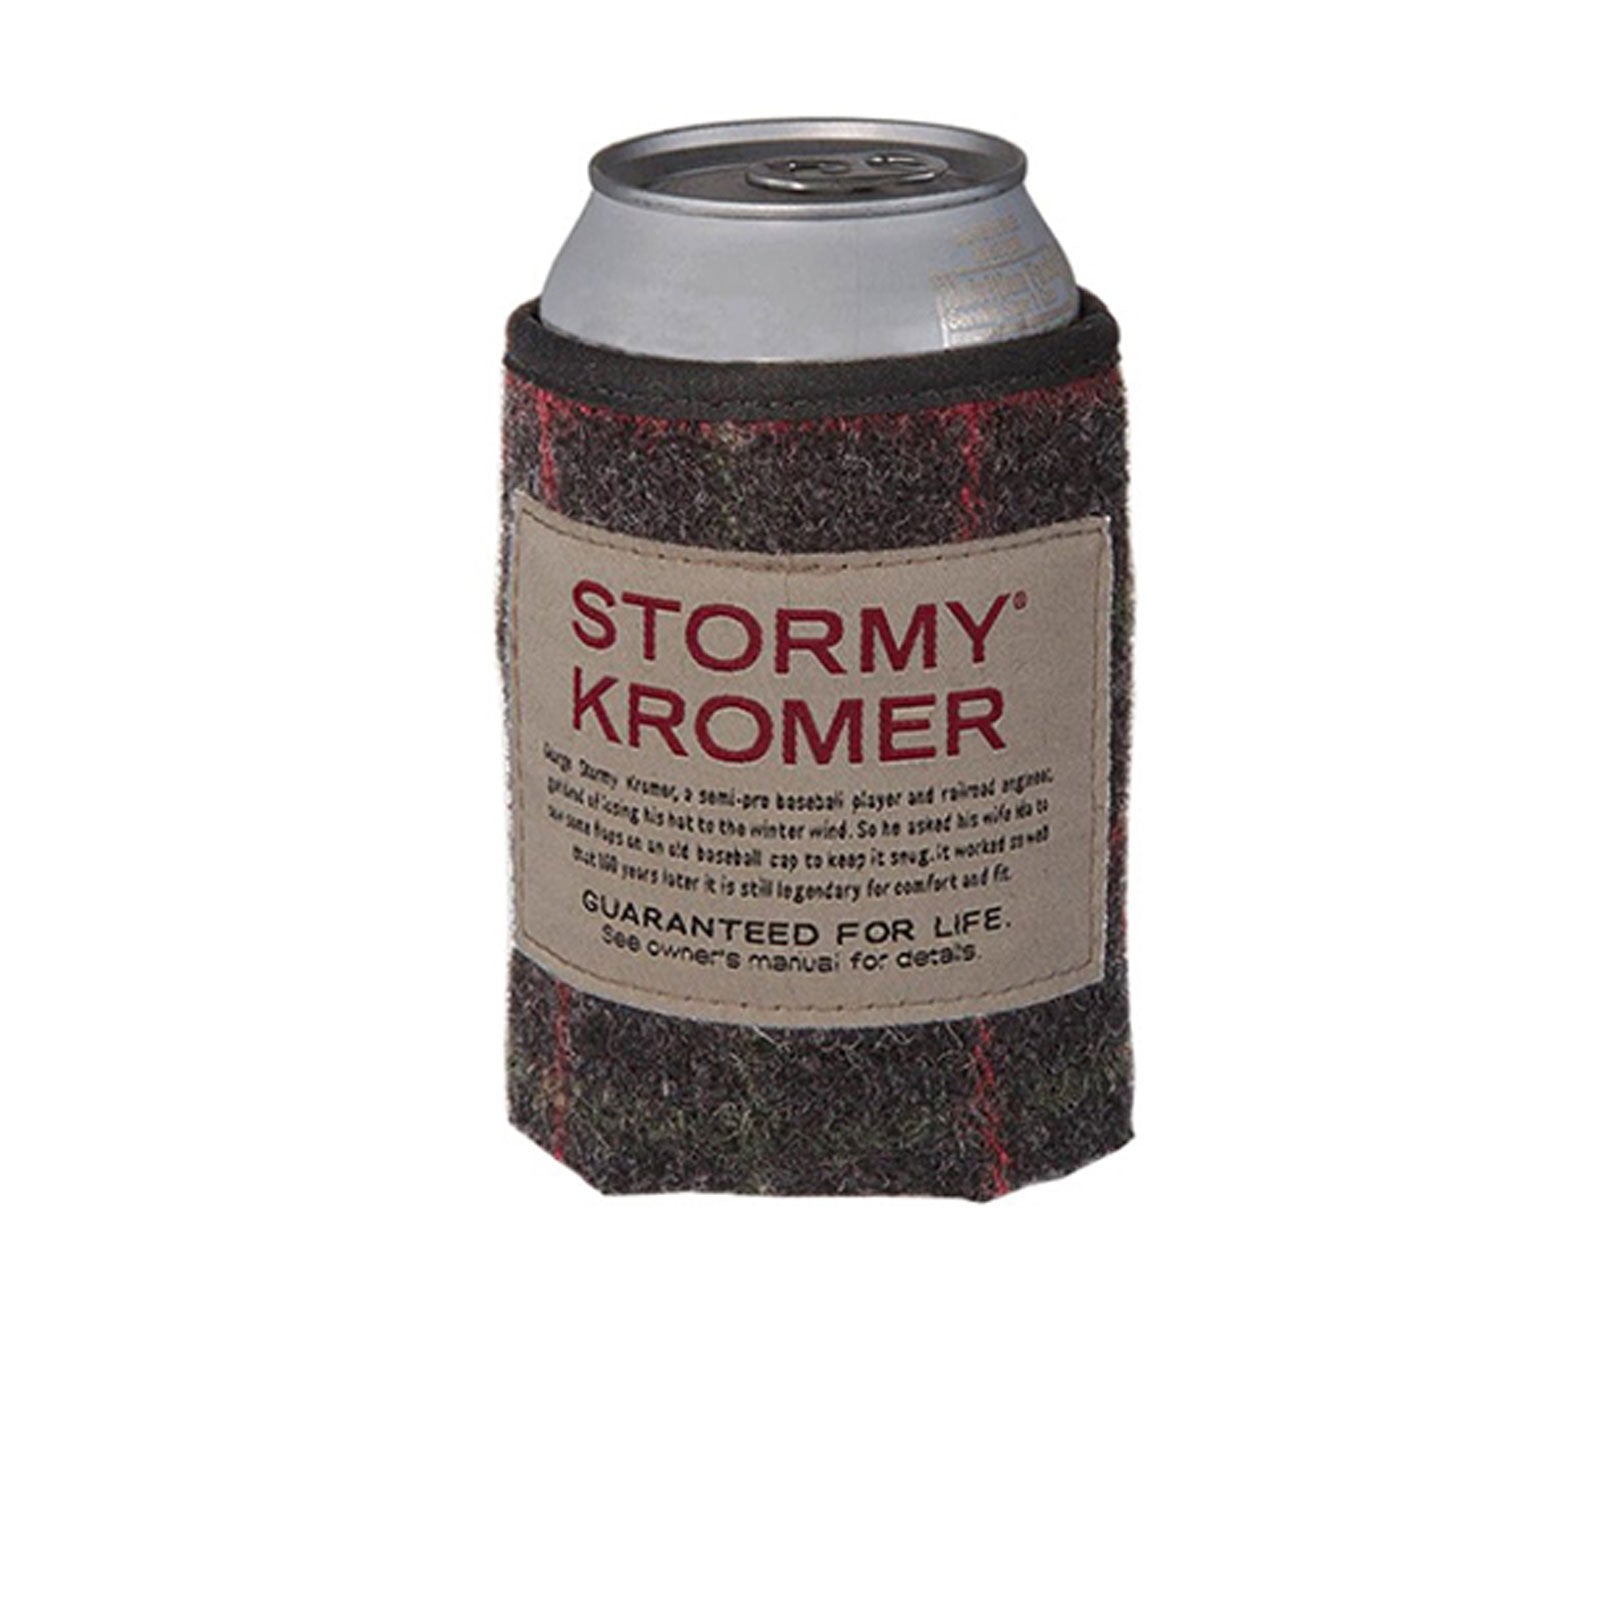 Stormy Kromer The Kromer Can Wrap - Black Accessories - Drinkware - Accessories - The Heel Shoe Fitters